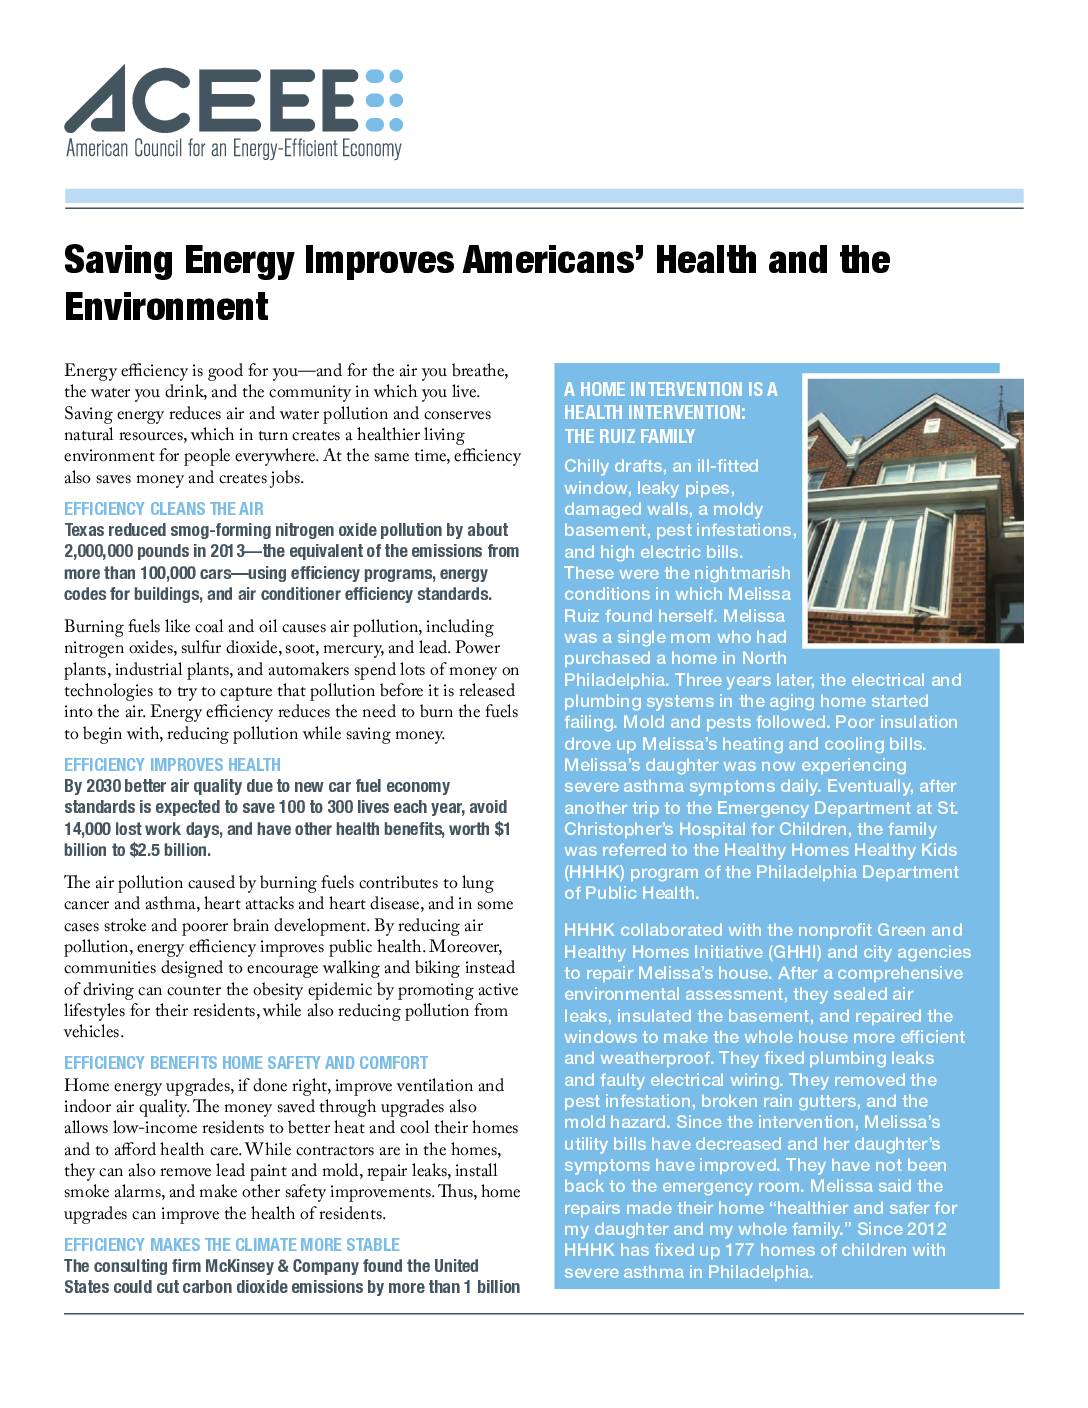 Saving Energy Improves Americans’ Health and the Environment